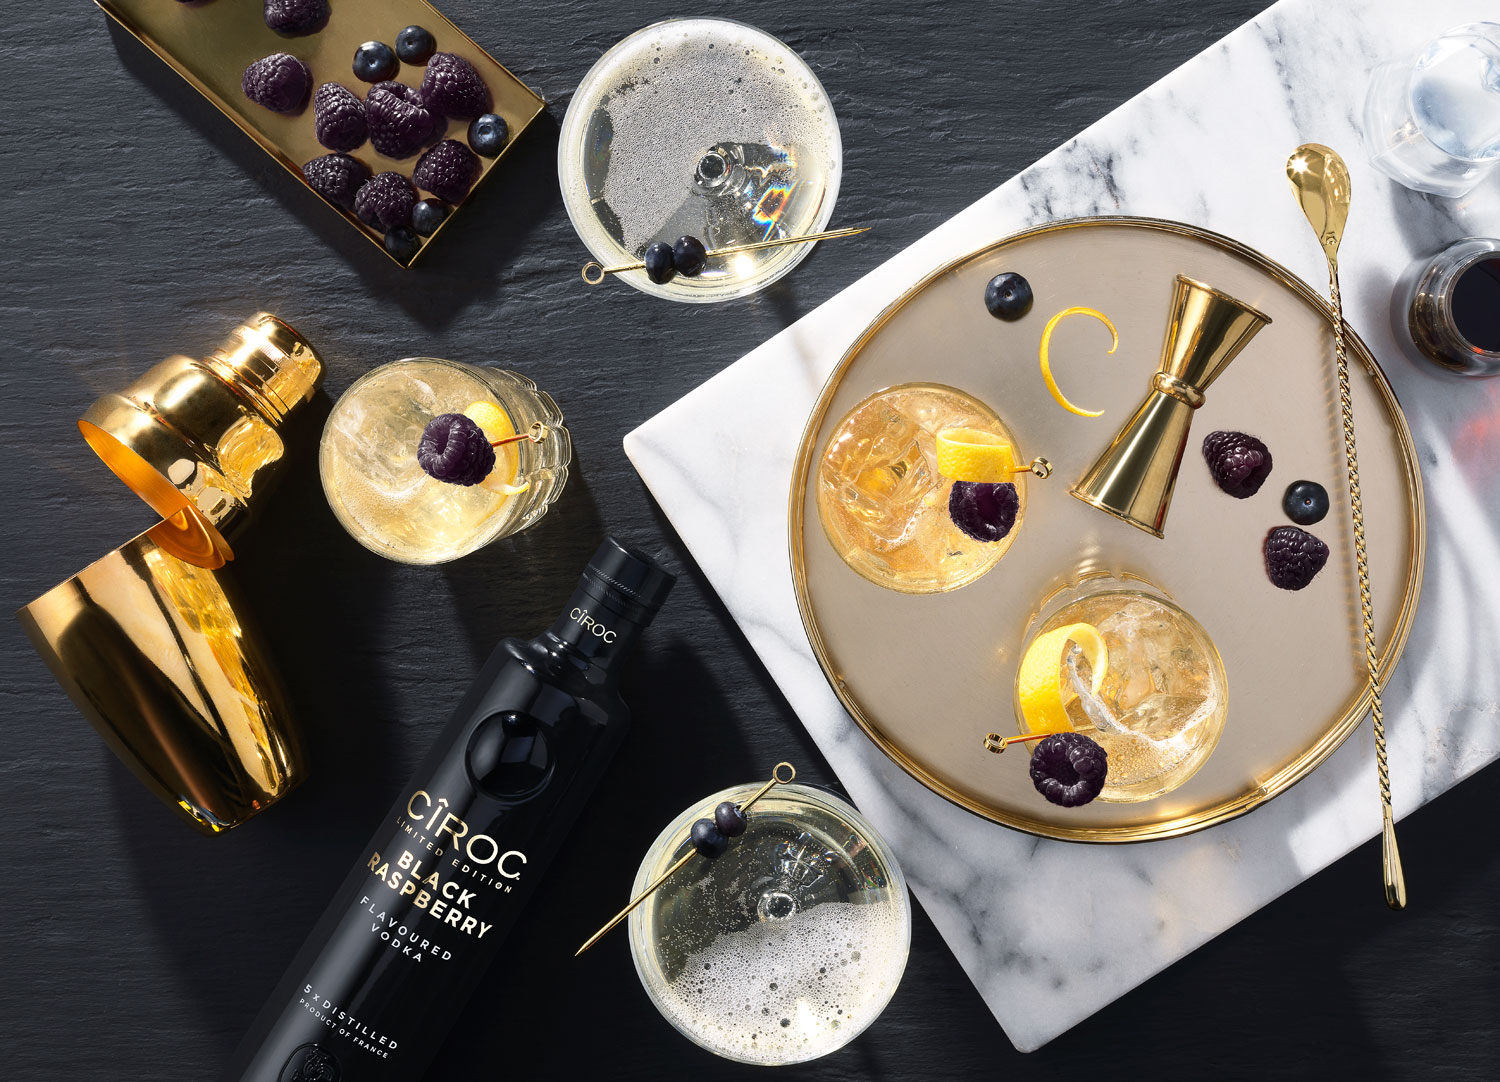 CÎROC Black Raspberry Vodka Adds A Touch Of Glamour To Winter